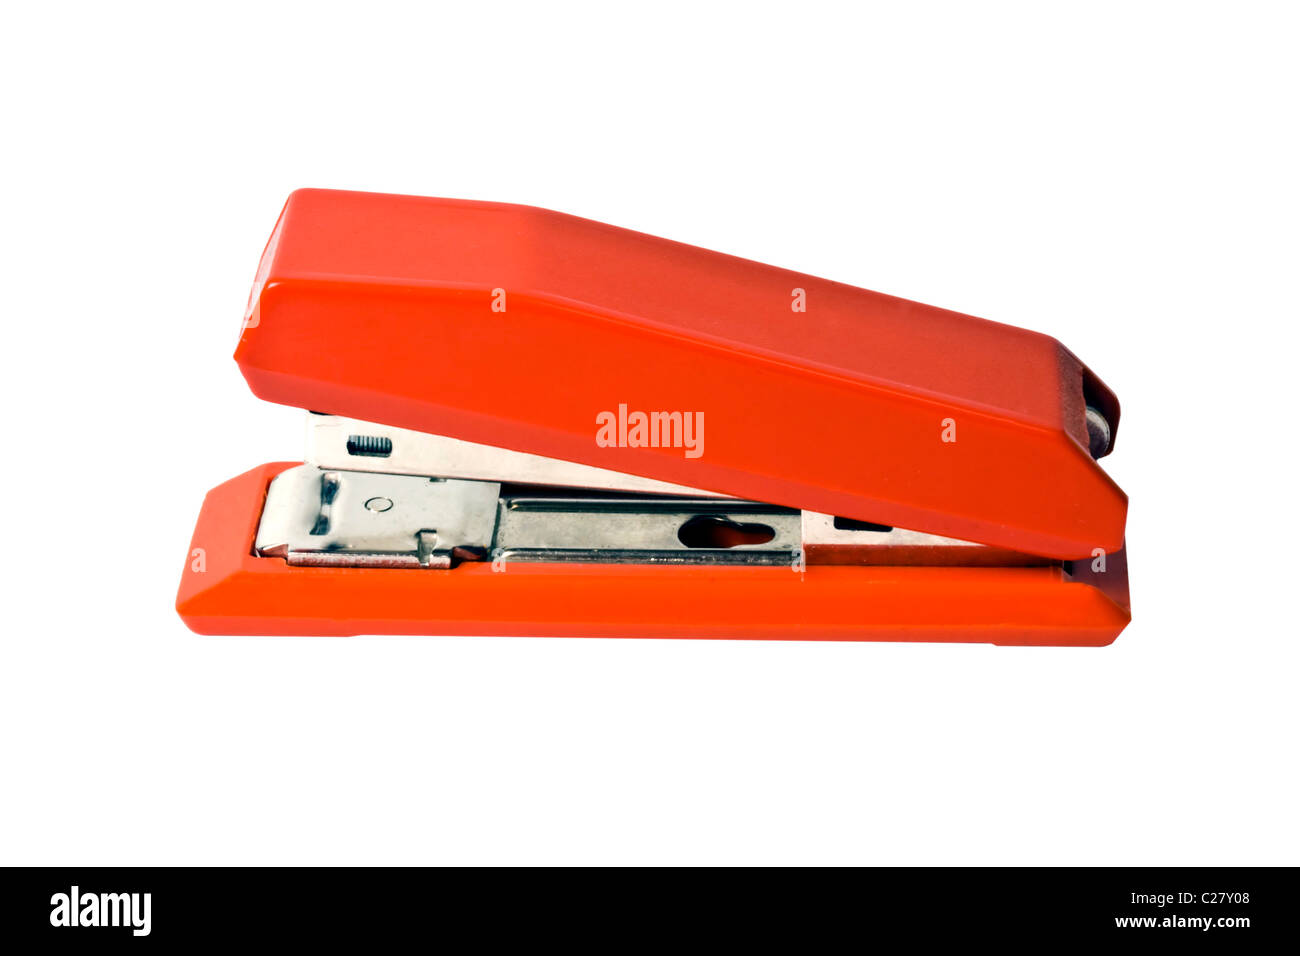 Red Stapler isolated on white background Stock Photo